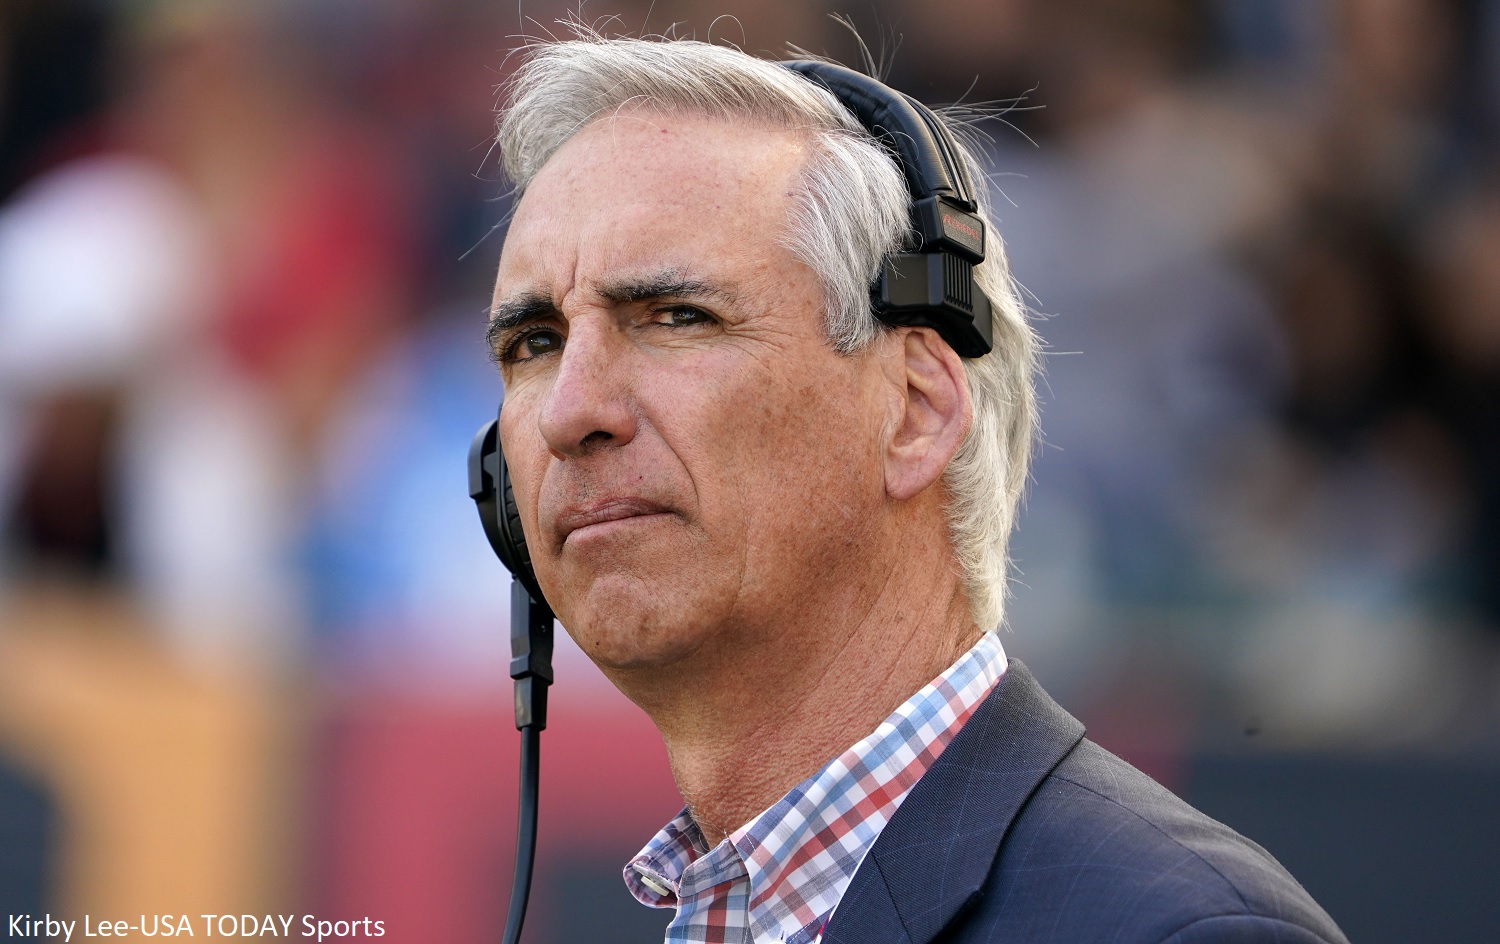 Oliver Luck accuses Vince McMahon of firing him for 'sinister purpose'